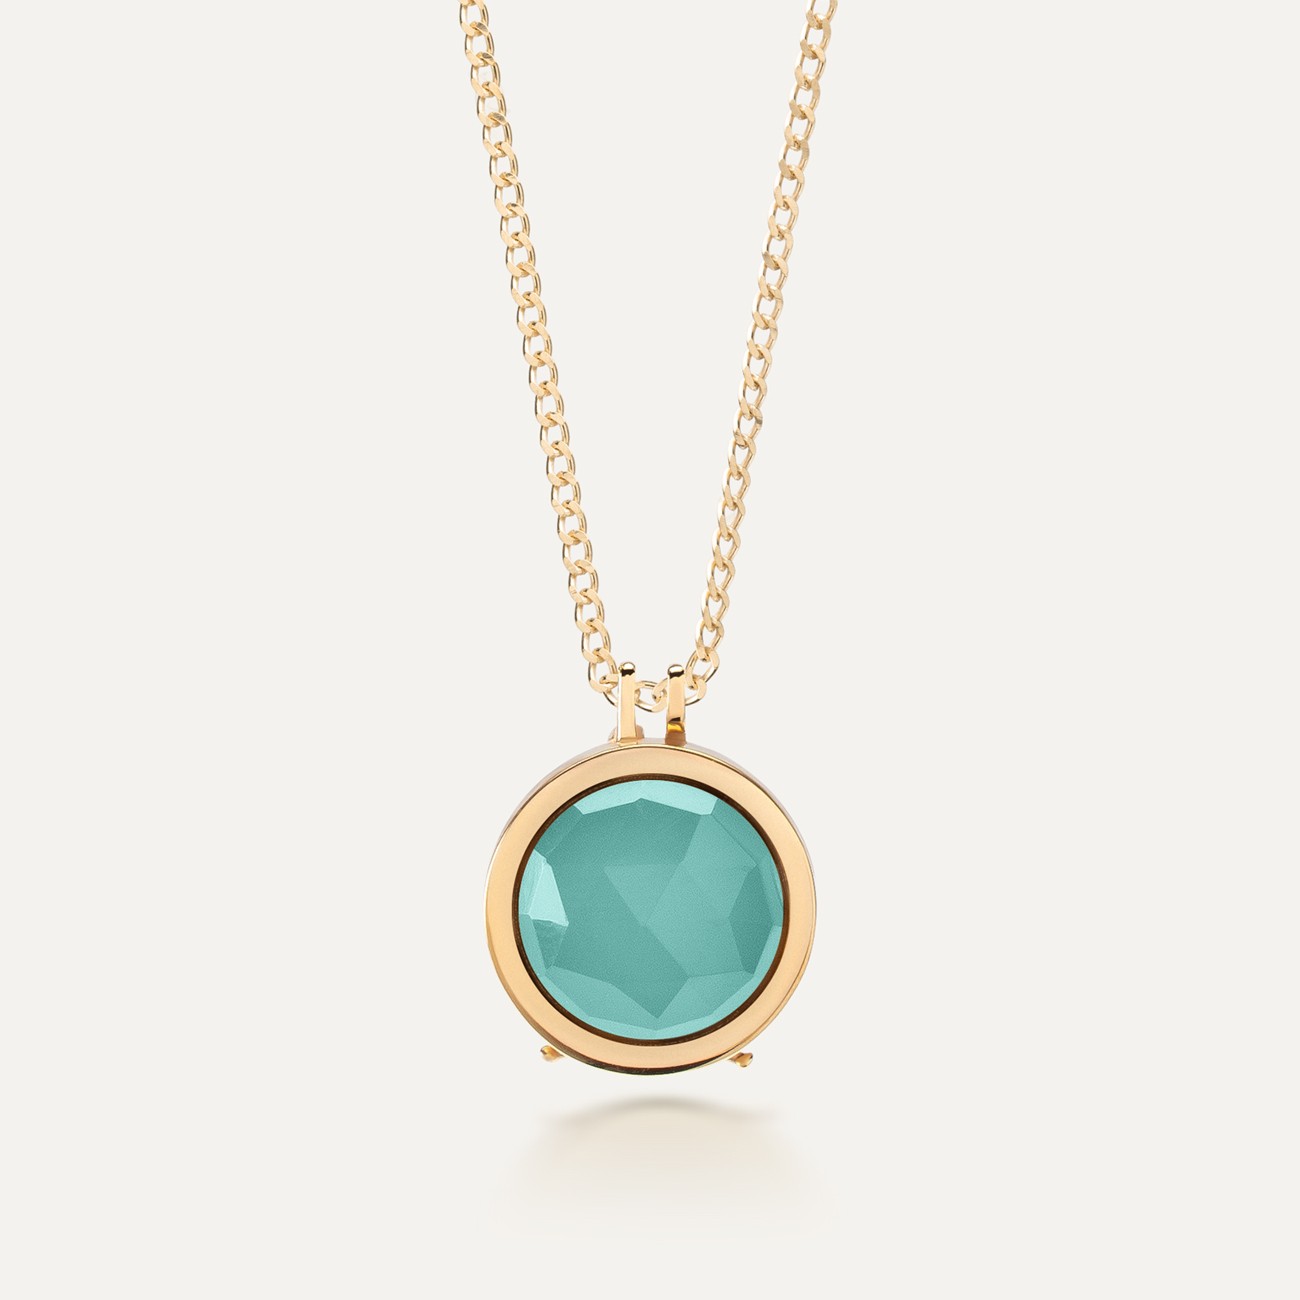 Locket pendant necklace, engraved & foto, turquoise natural stone, sterling silver 925